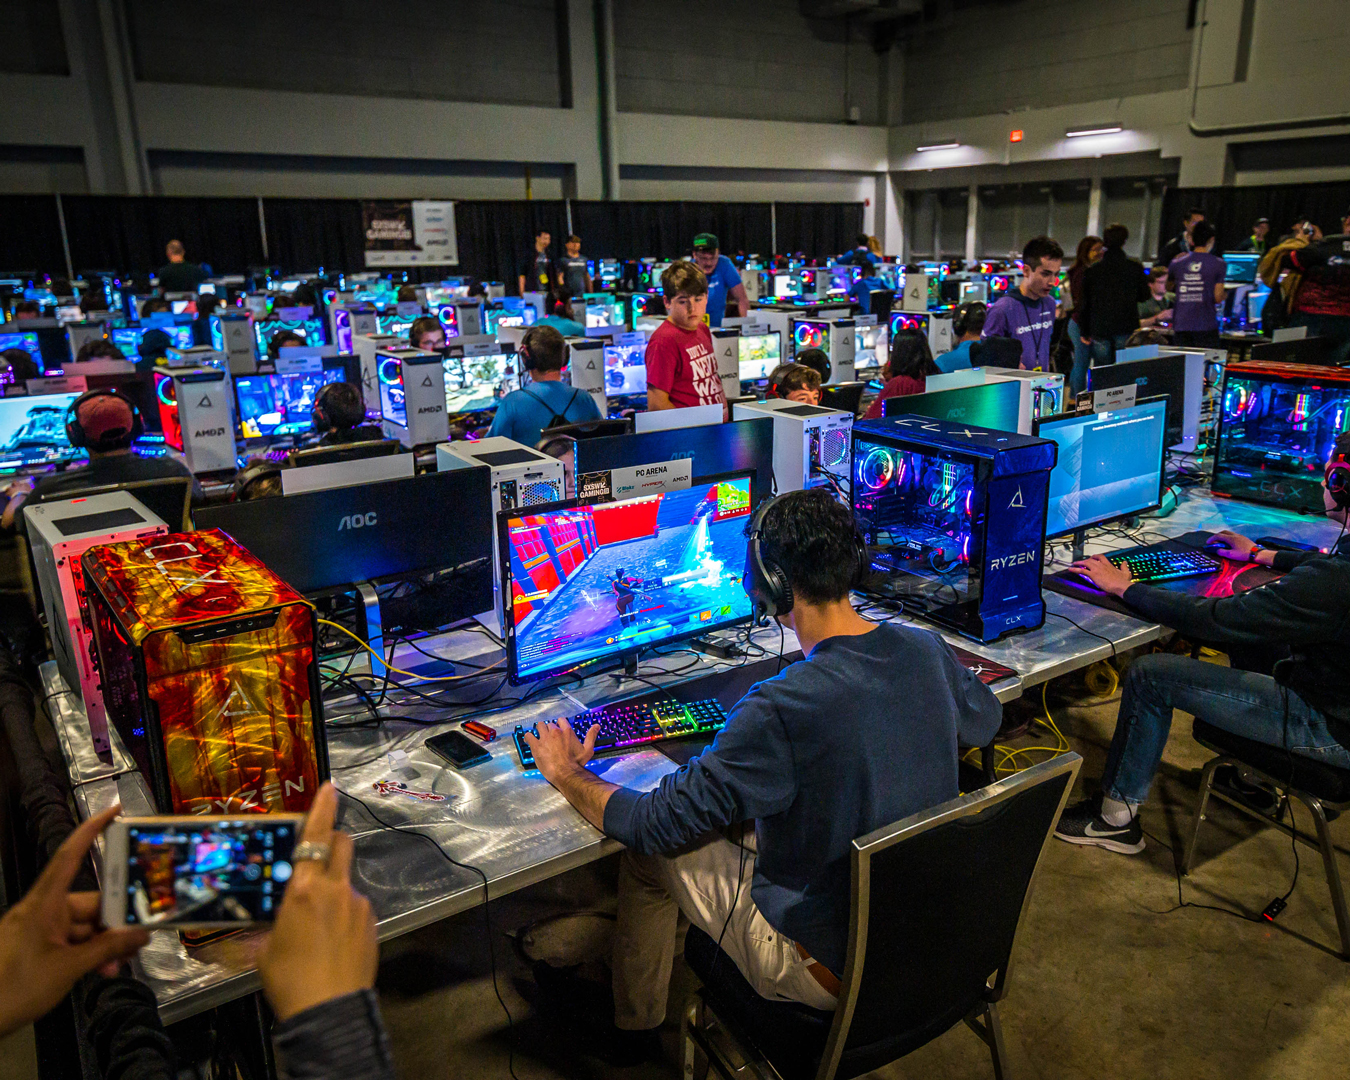 A gaming room which is part of the Games Festival at South by Southwest Sydney